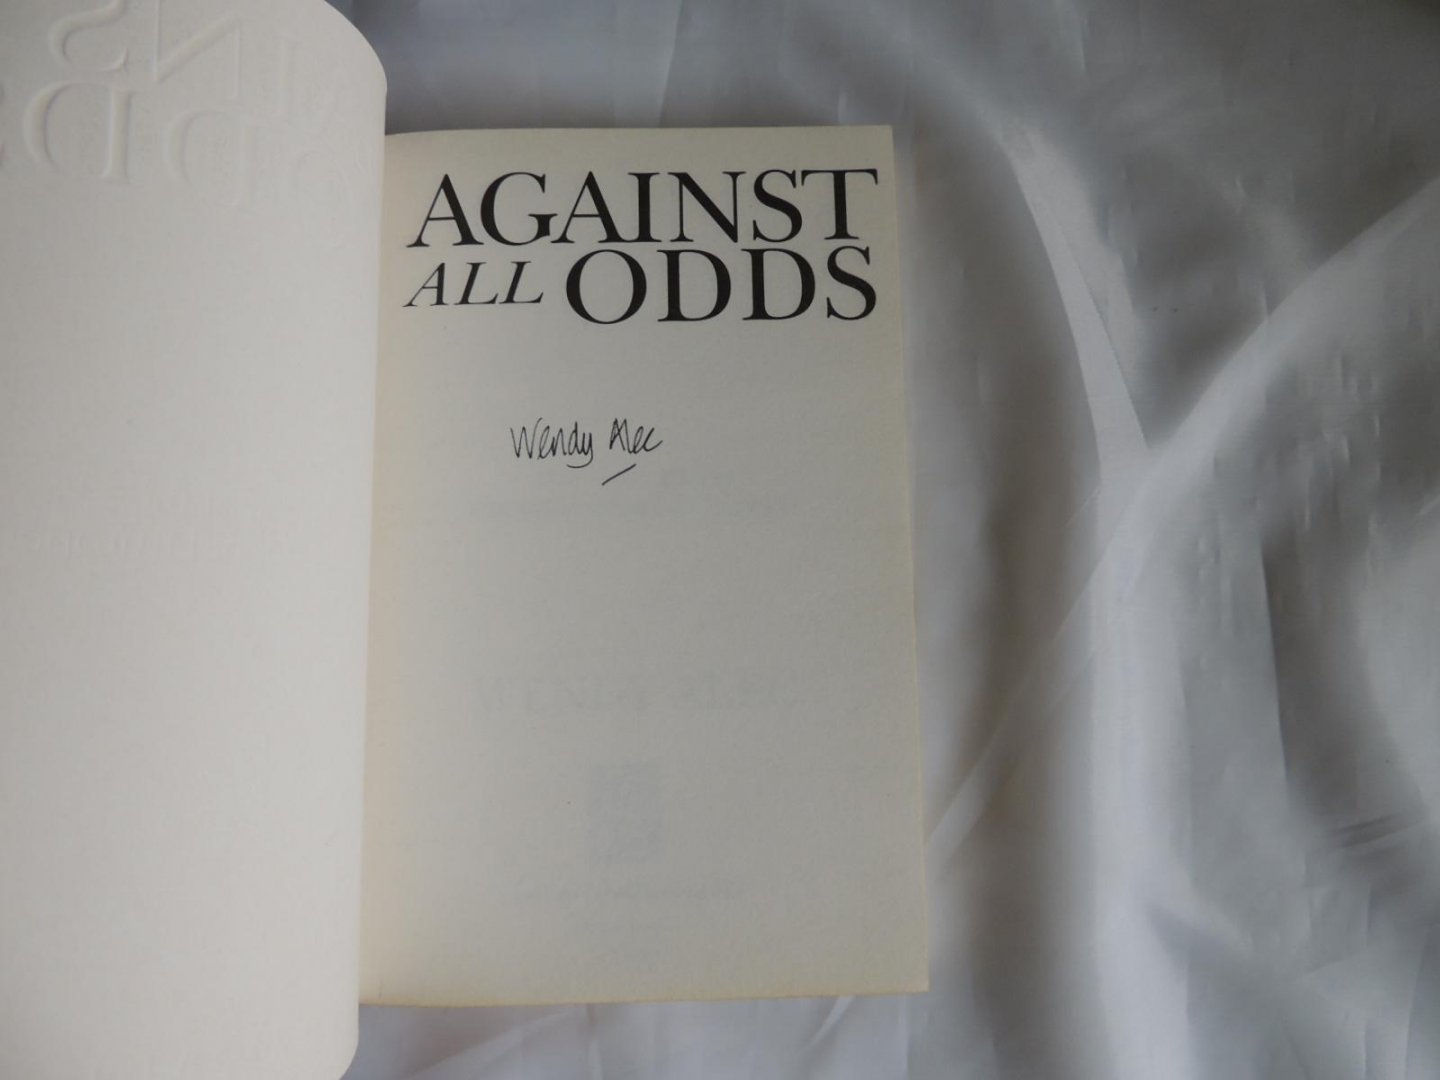 RORY WENDY ALEC GOD.TV - Against all odds - signed by Wendy Alec